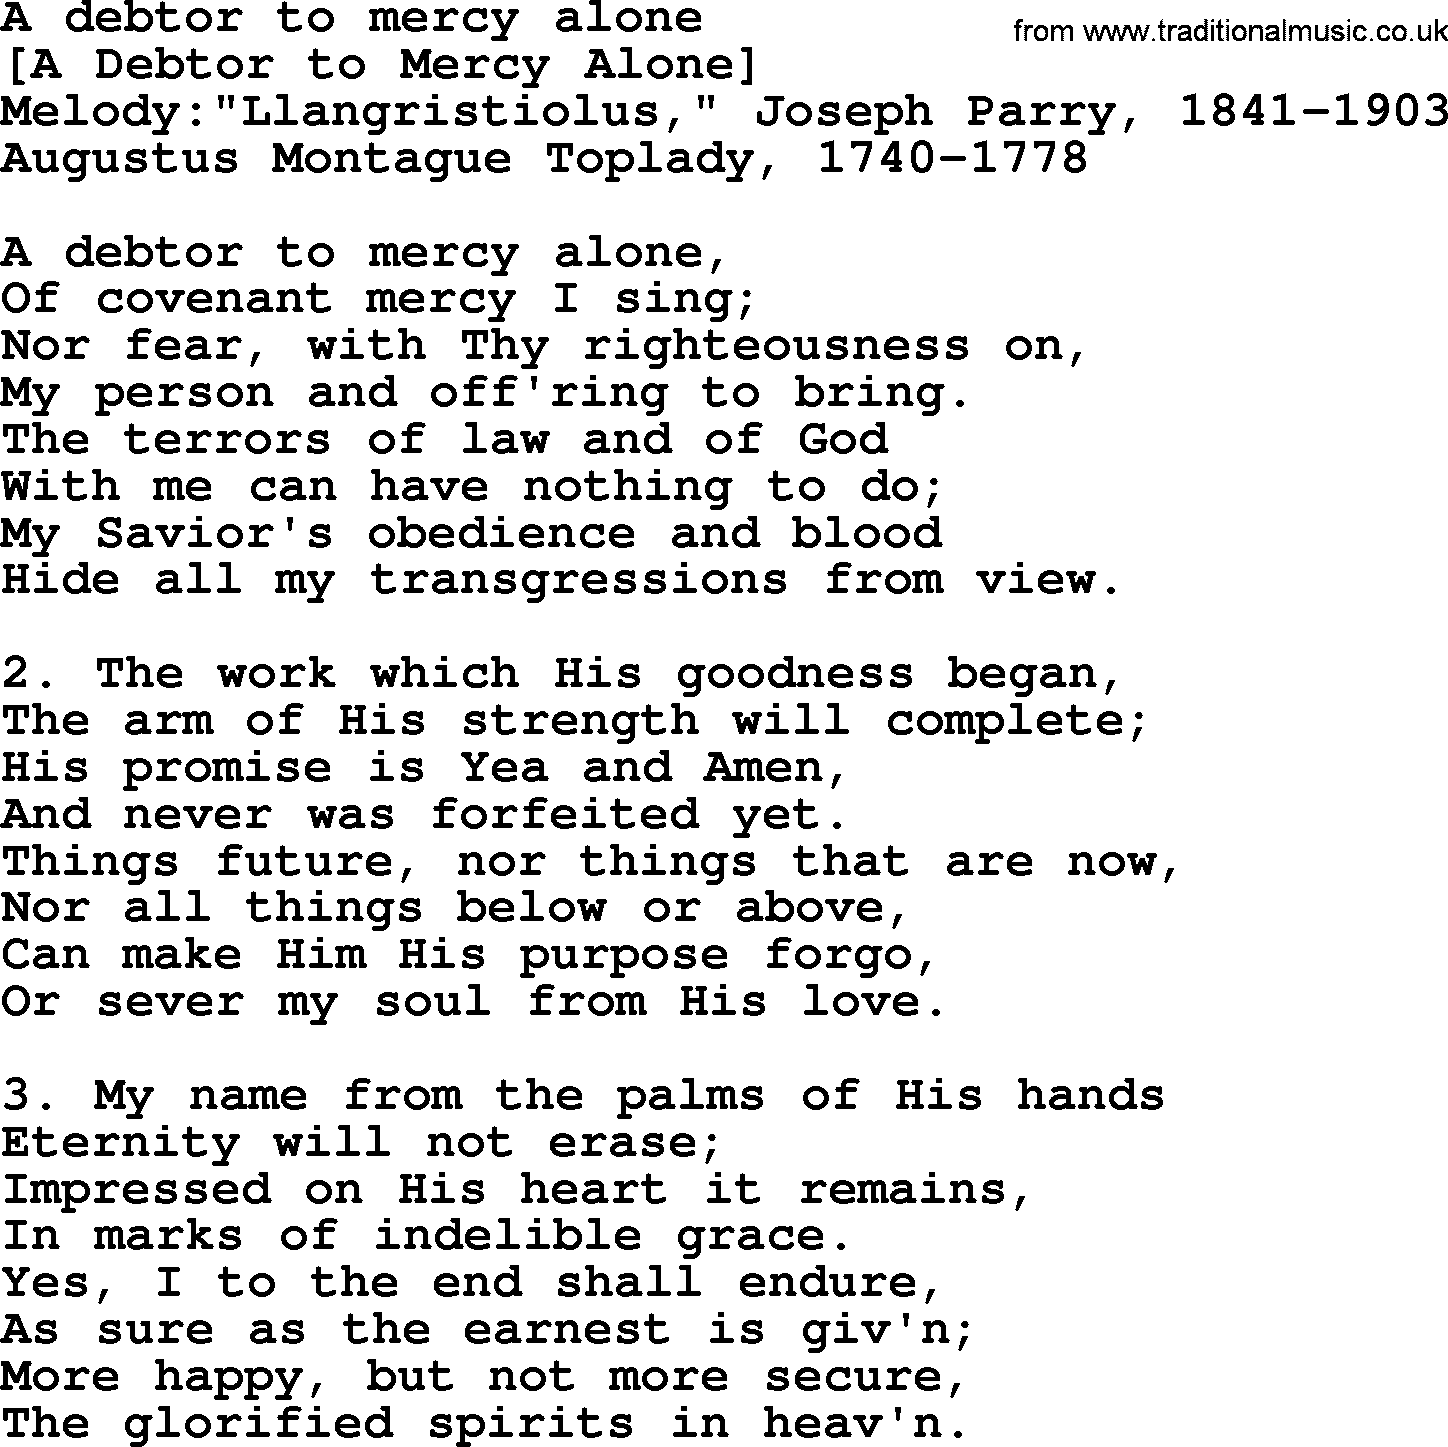 Old English Song: A Debtor To Mercy Alone lyrics